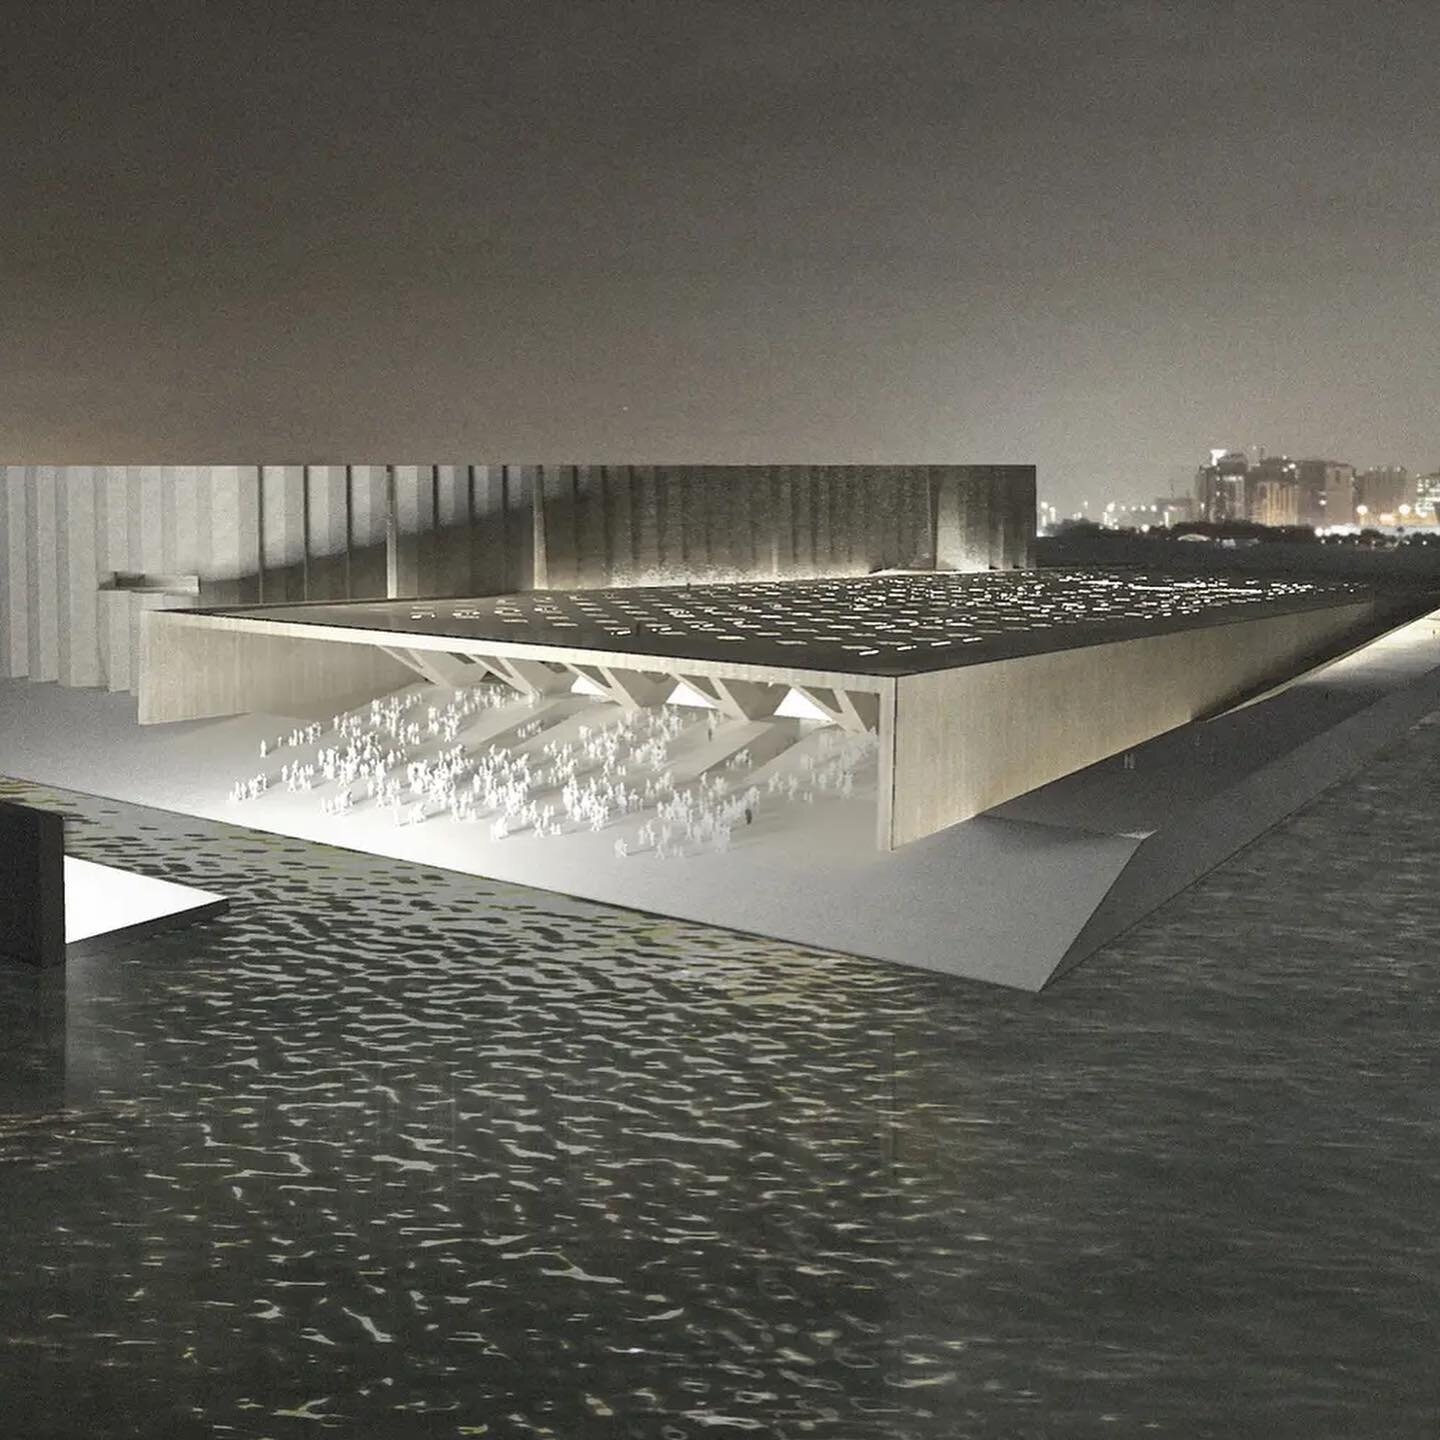 Qatar has announced the plans for three new museums from a trio of Pritzker Prize winners... 🇶🇦 🖼 

Qatari officials are hopeful the trio of museums will combine with other recent cultural developments such as the Jean Nouvel-designed National Mus